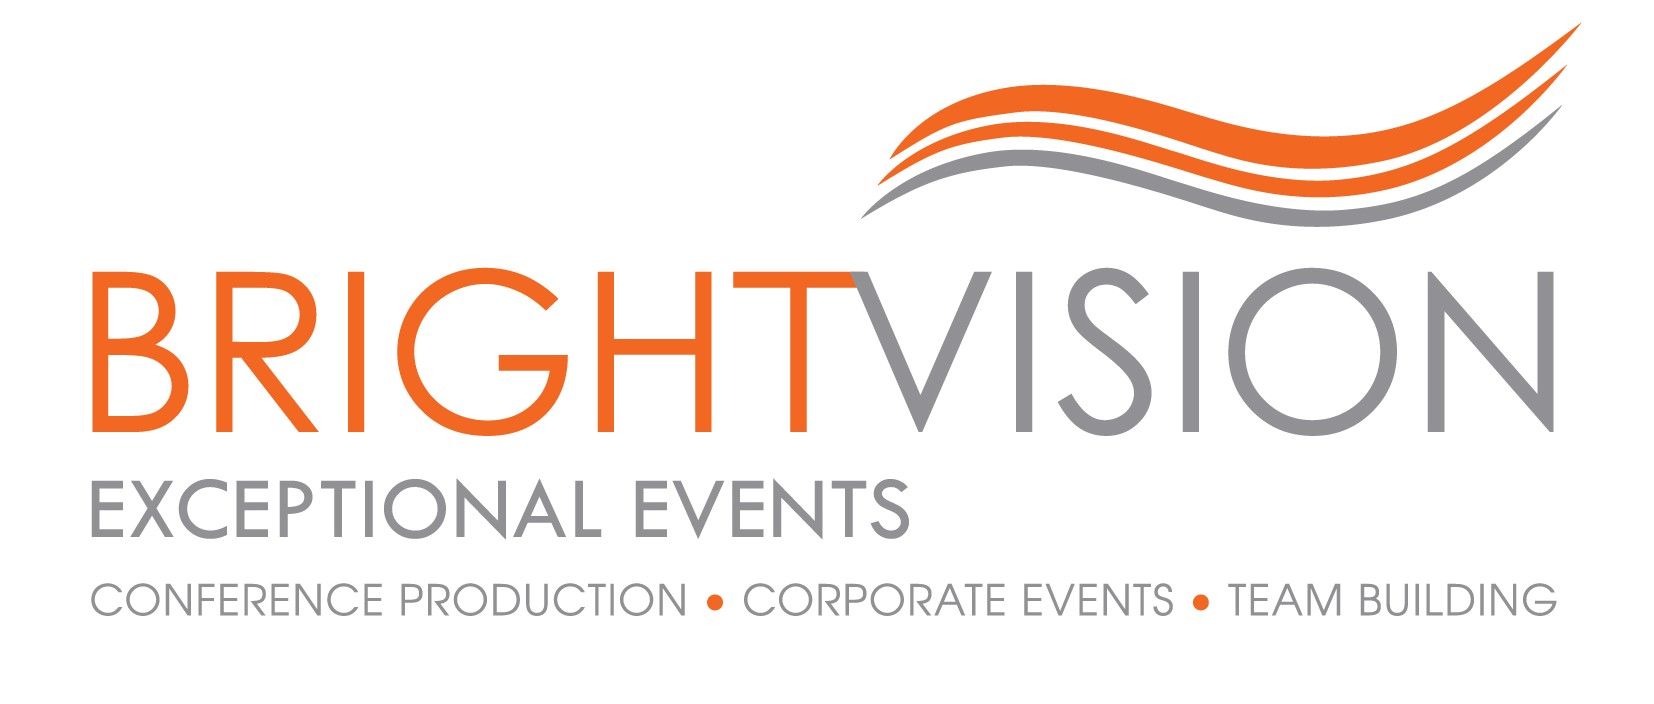 Bright Vision Events